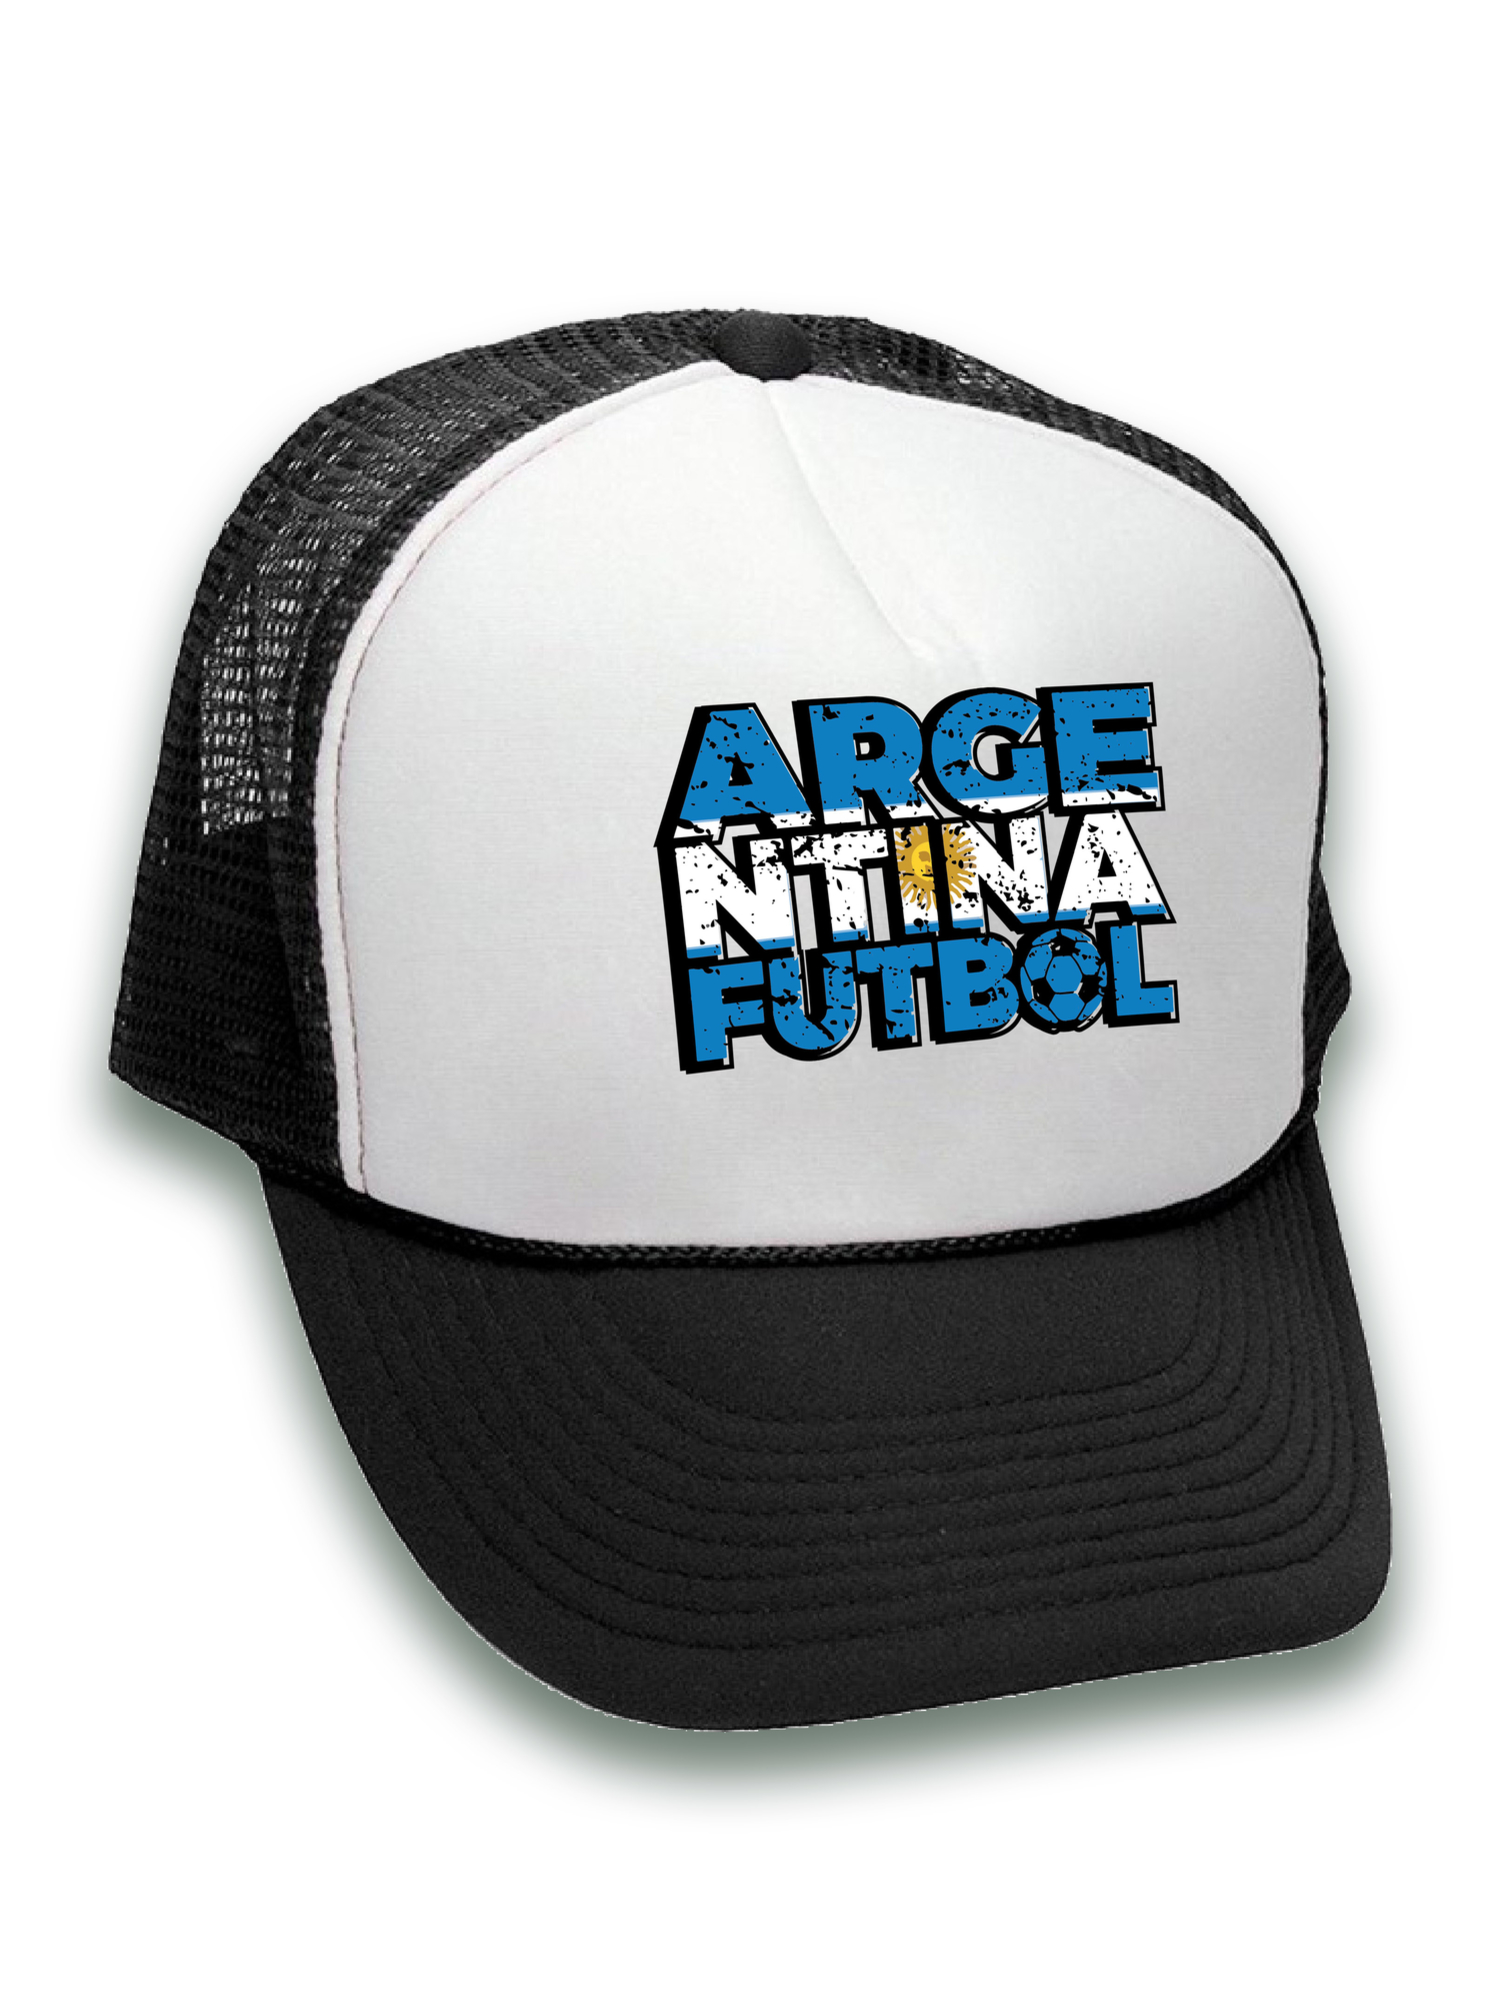 Awkward Styles Argentina Futbol Hat Argentina Trucker Hats for Men and Women Hat Gifts from Argentina Argentinian Soccer Cap Argentinian Hats Unisex Argentina Snapback Hat Argentina 2018 Trucker Hats - image 2 of 6